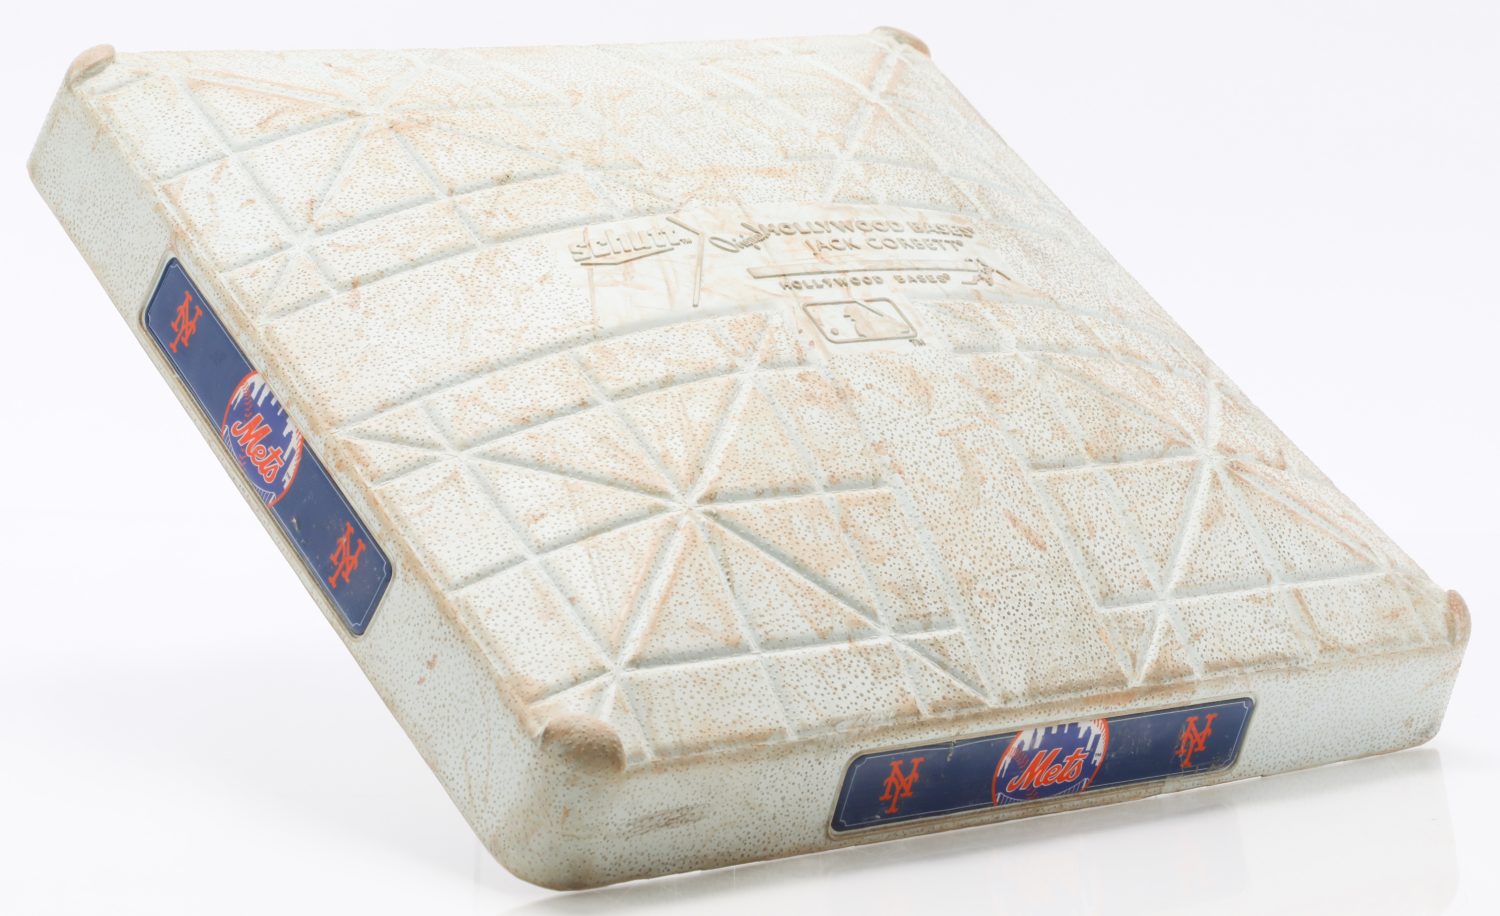 Base from Game When Noah Syndergaard Hit his First MLB Home Run